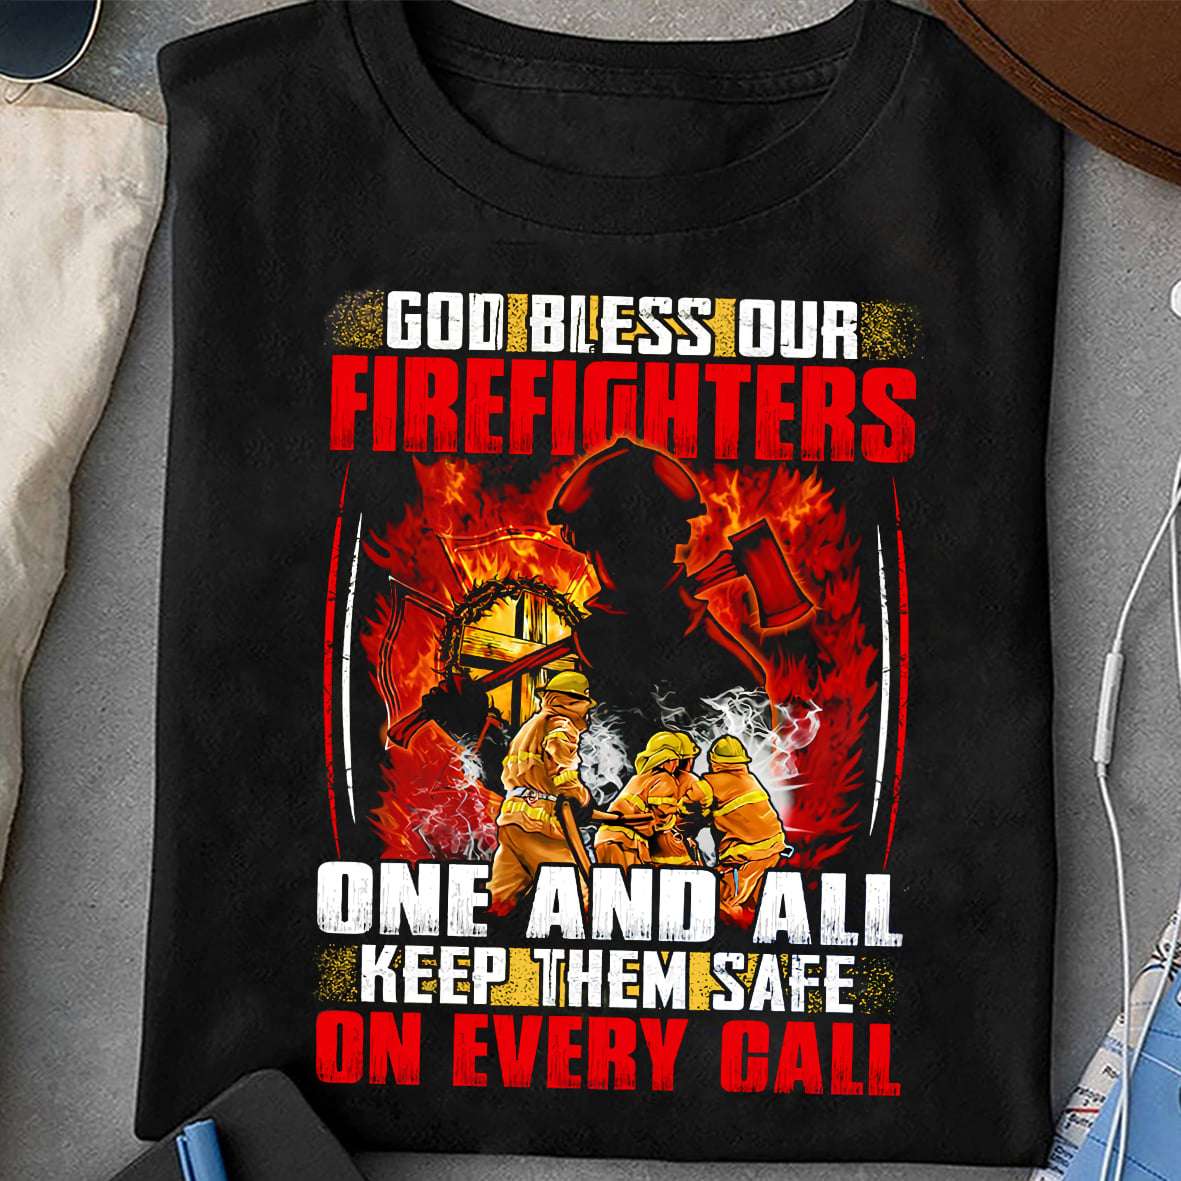 God bless our firefighters, one and all keep them safe on every call - Firefighter brave people